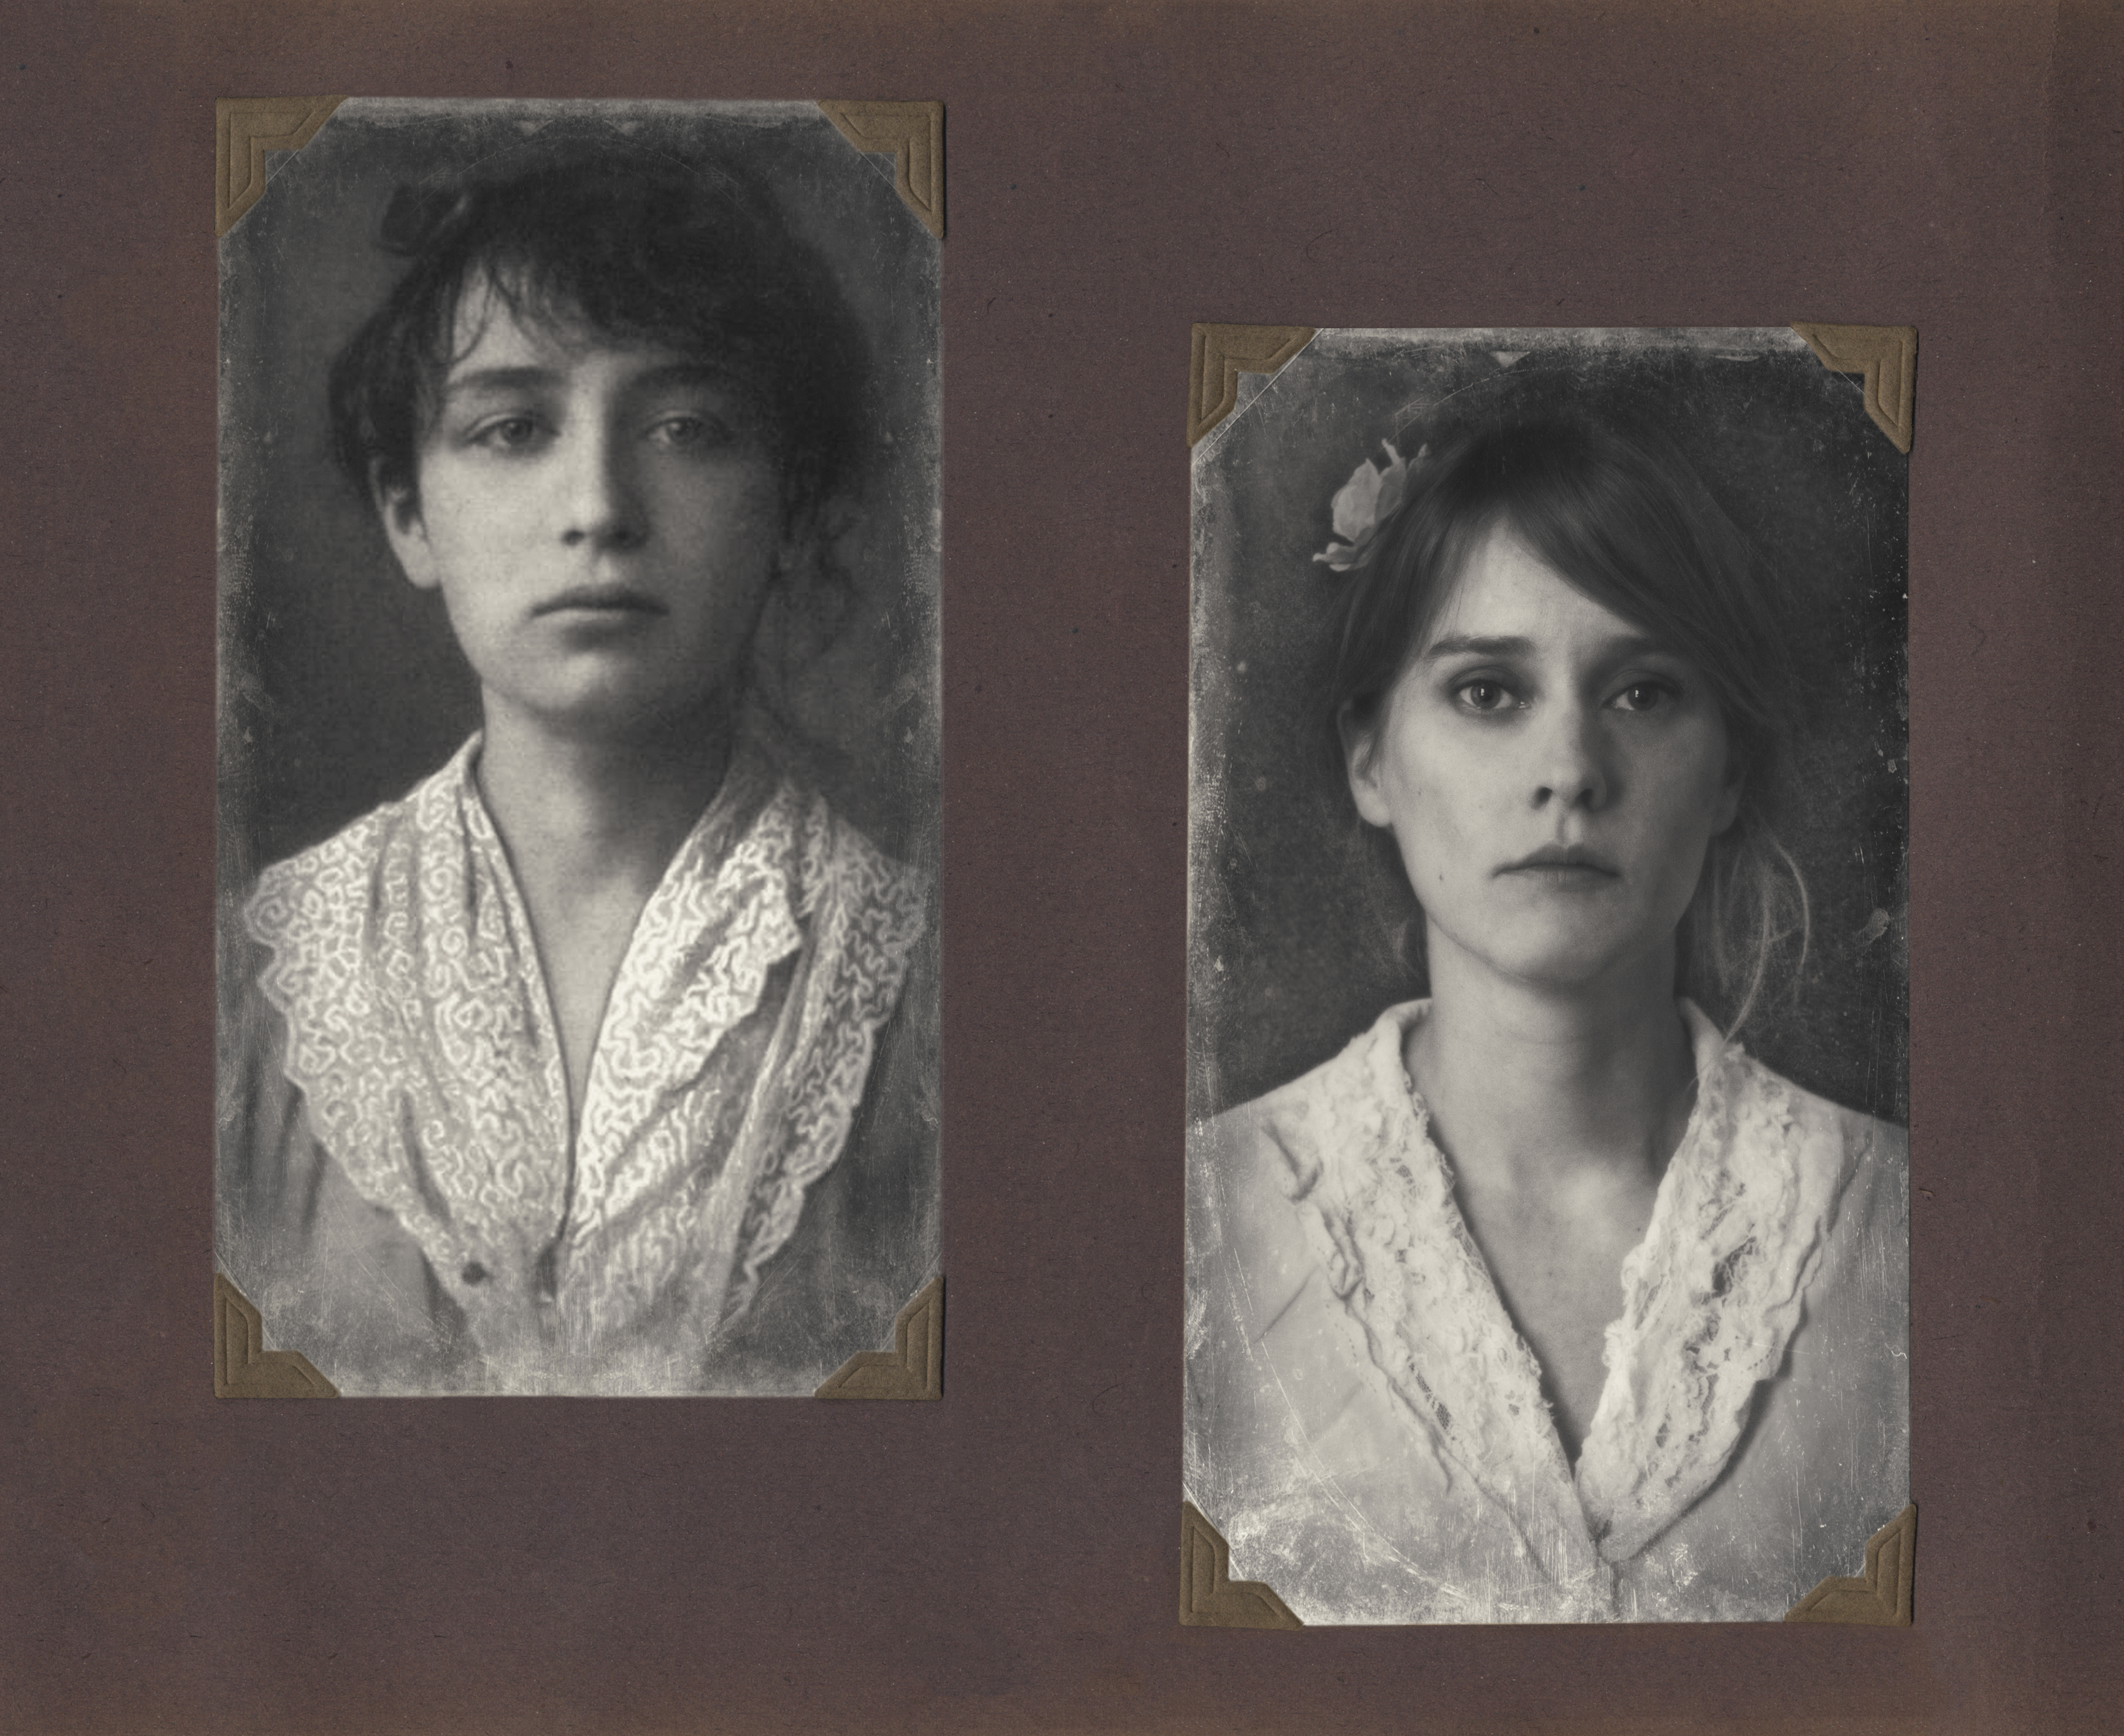 Truus de Boer for her theatre soloperformance about Camille Claudel (Camille on the left)